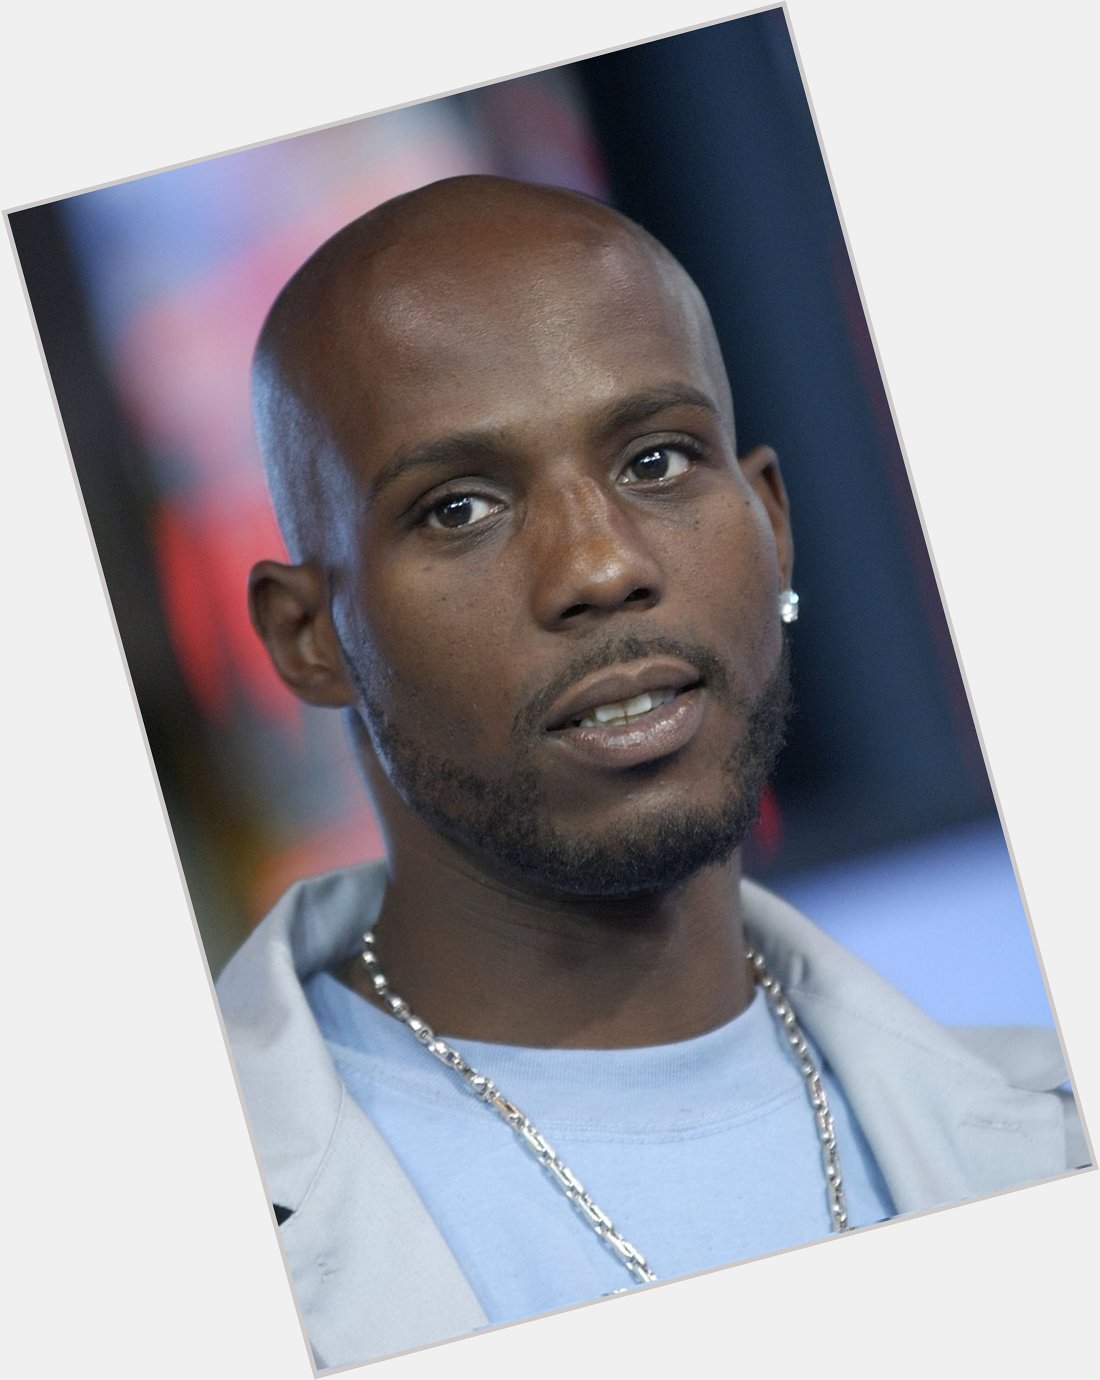 HAPPY BIRTHDAY TO THE LATE EARL \"DMX\" SIMMONS WHO WOULD\VE TURNED 52 TODAY. 